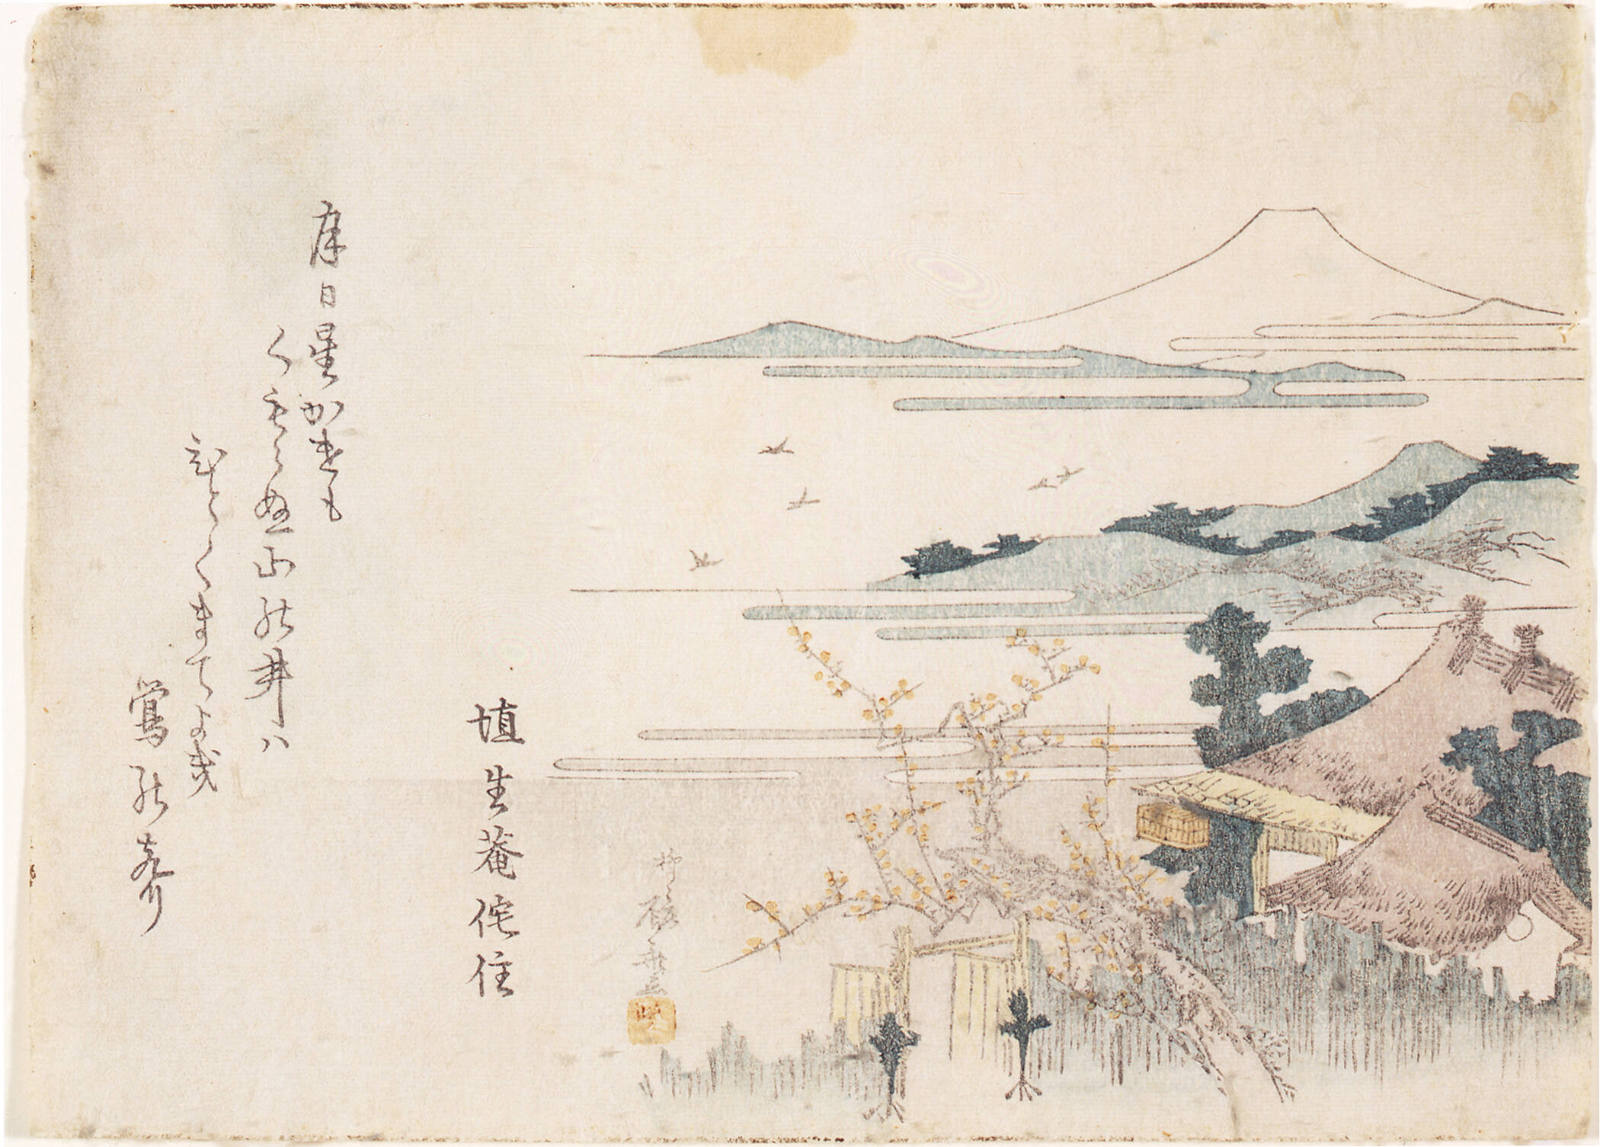 Haniu-an (A Lonely Life at Haniu [claypit] Hermitage)